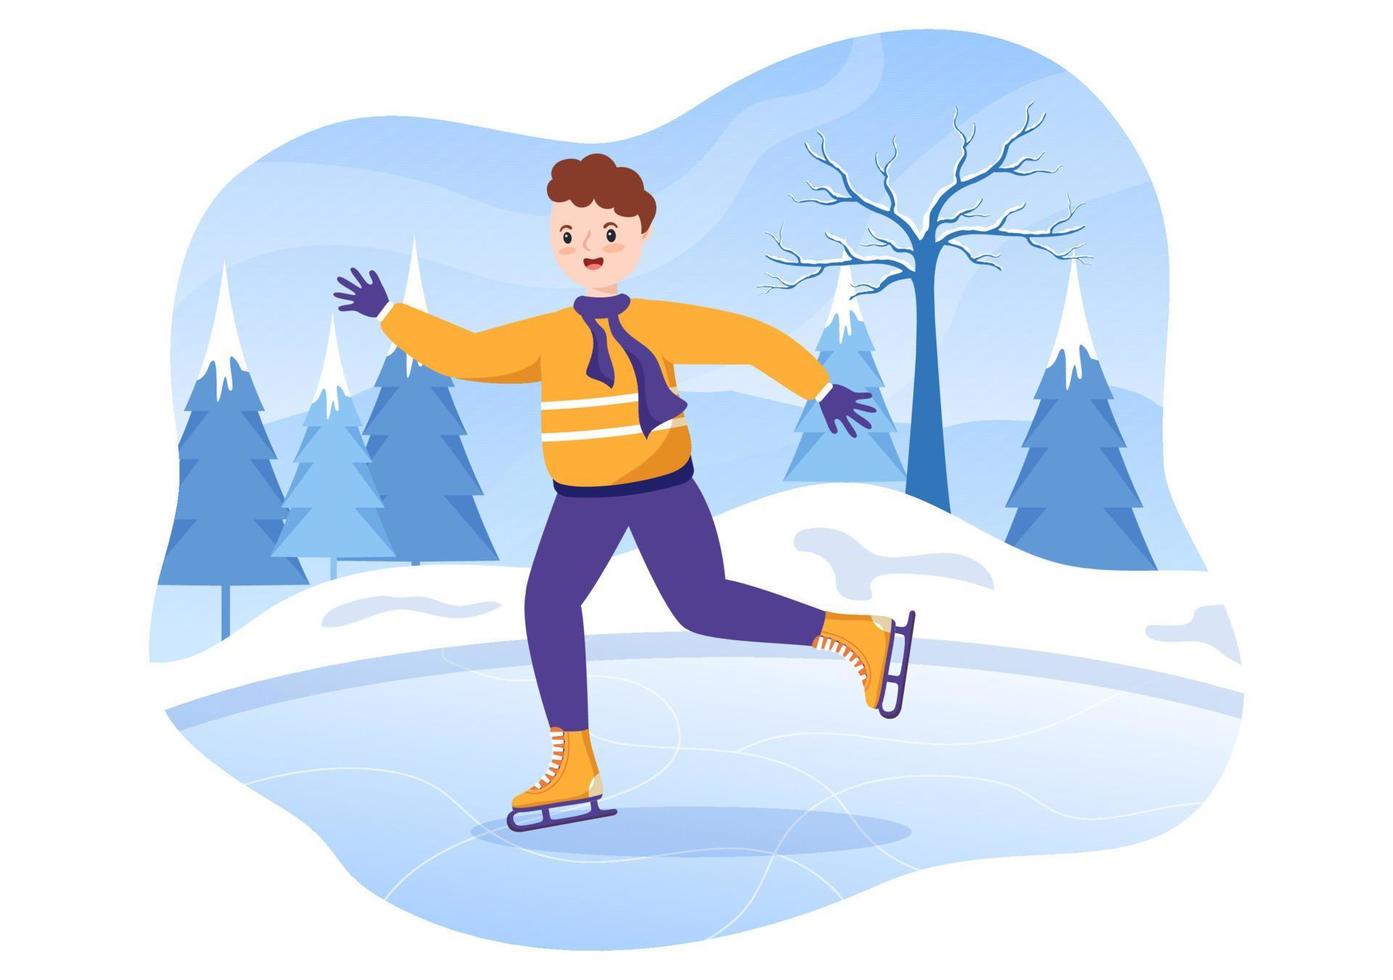 Ice Skating Hand Drawn Cartoon Flat Illustration of Winter Fun Outdoors Sport Activities on Ice Rink with Seasonal Outerwear vector